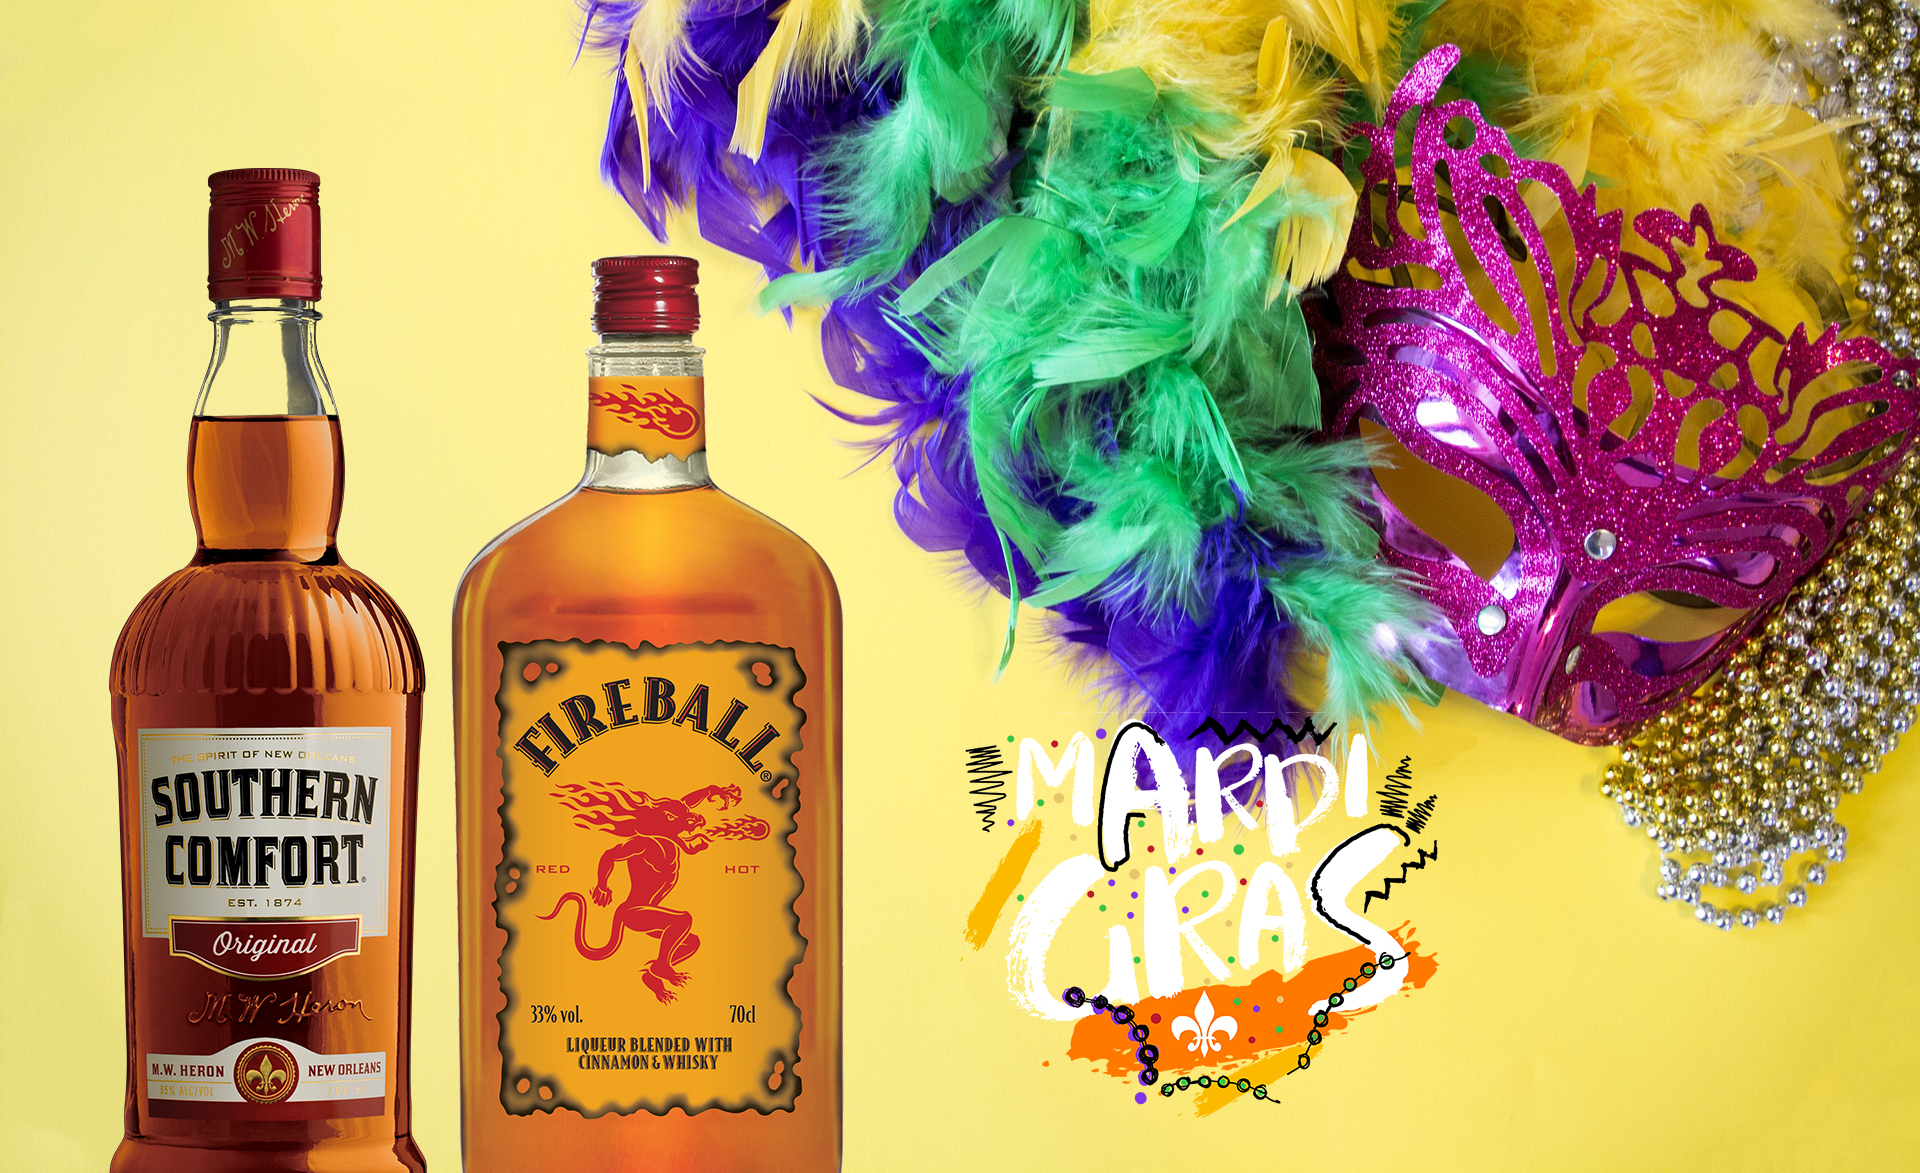 WhiskyNet Insight: Mardi Gras – the First Party of the Year